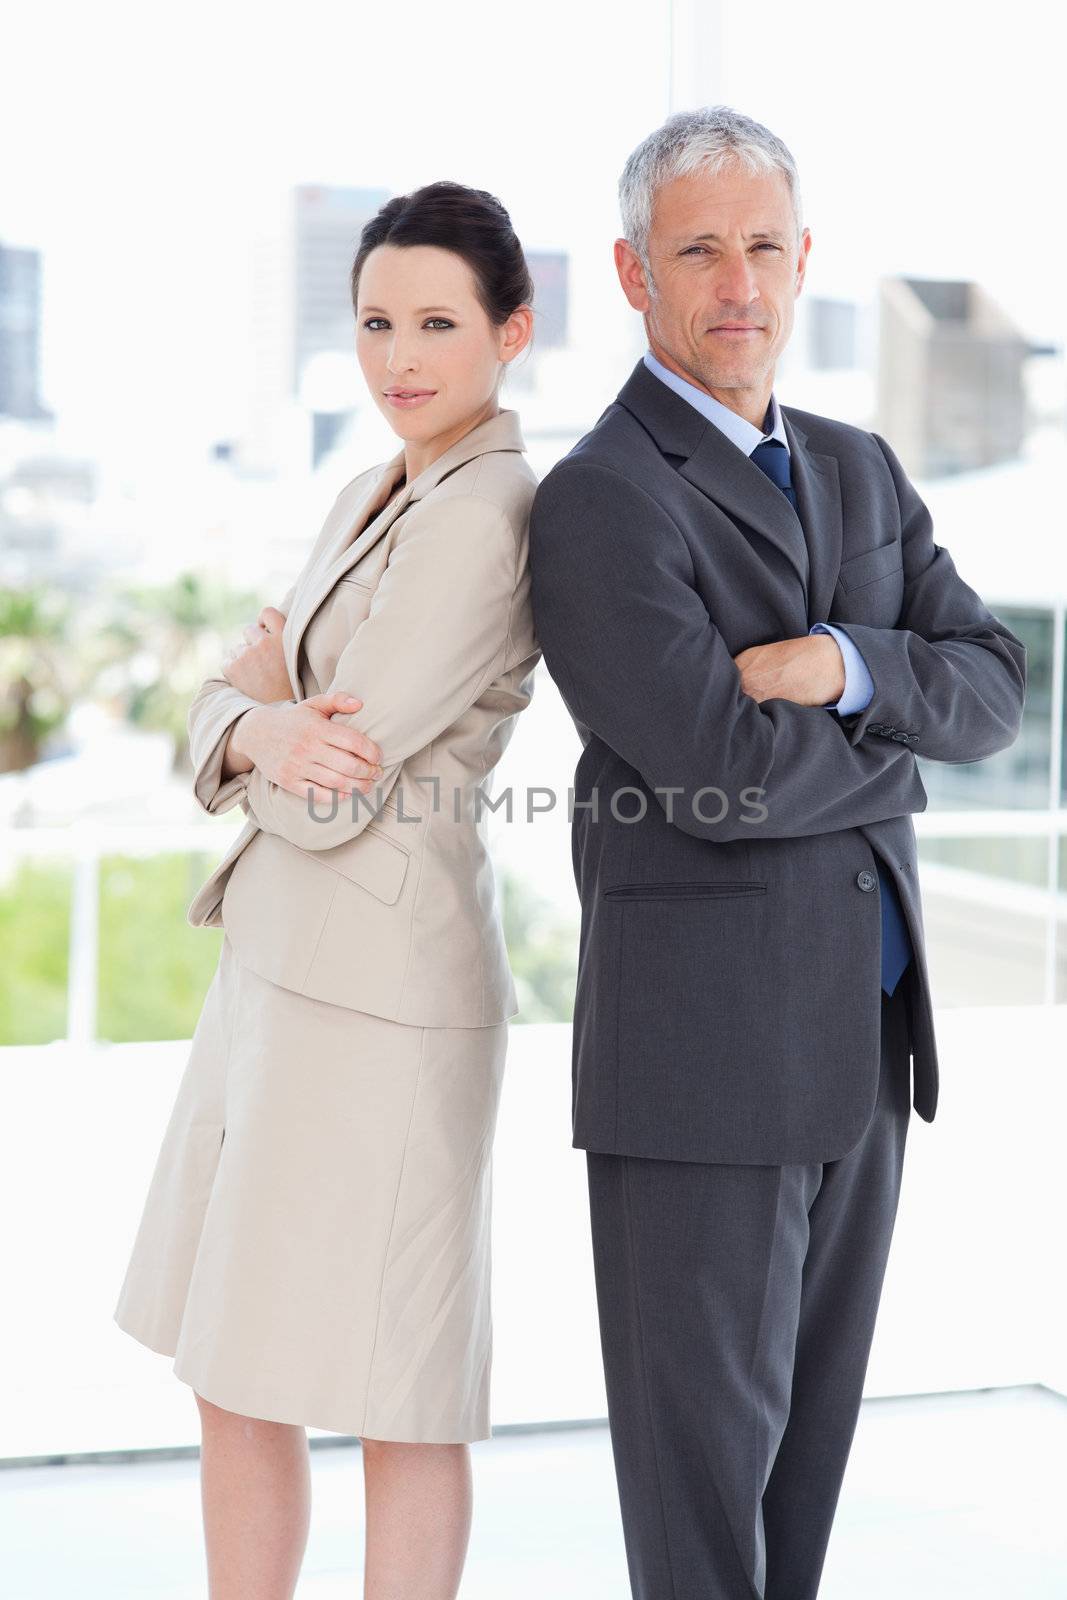 Two business people standing seriously in a well-lit room